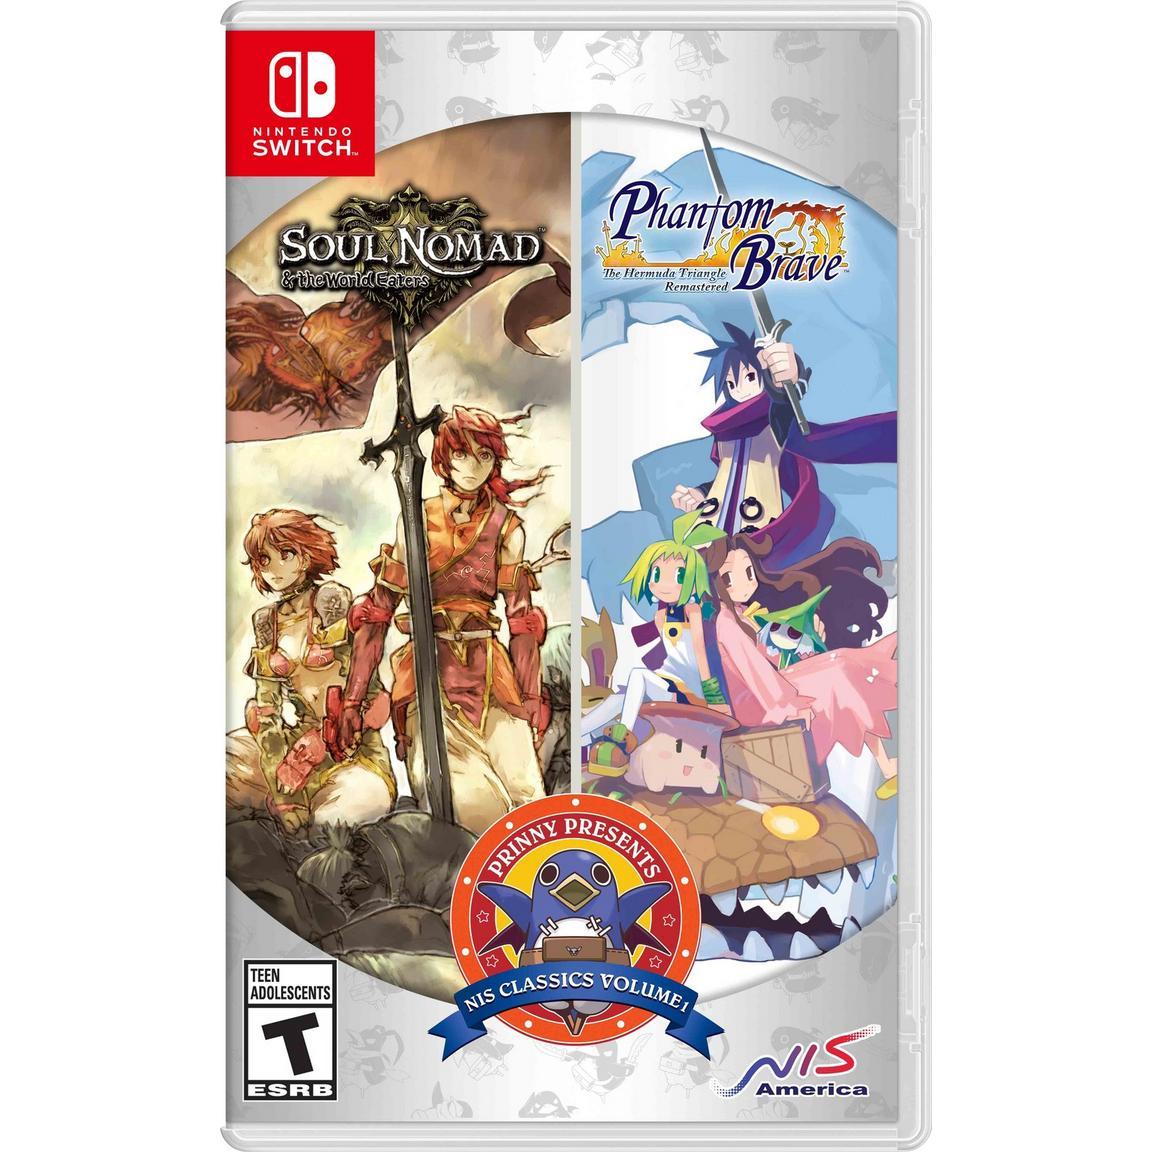 Prinny Presents NIS Classics Volume 1 Deluxe Edition Nintendo Switch for $29.99